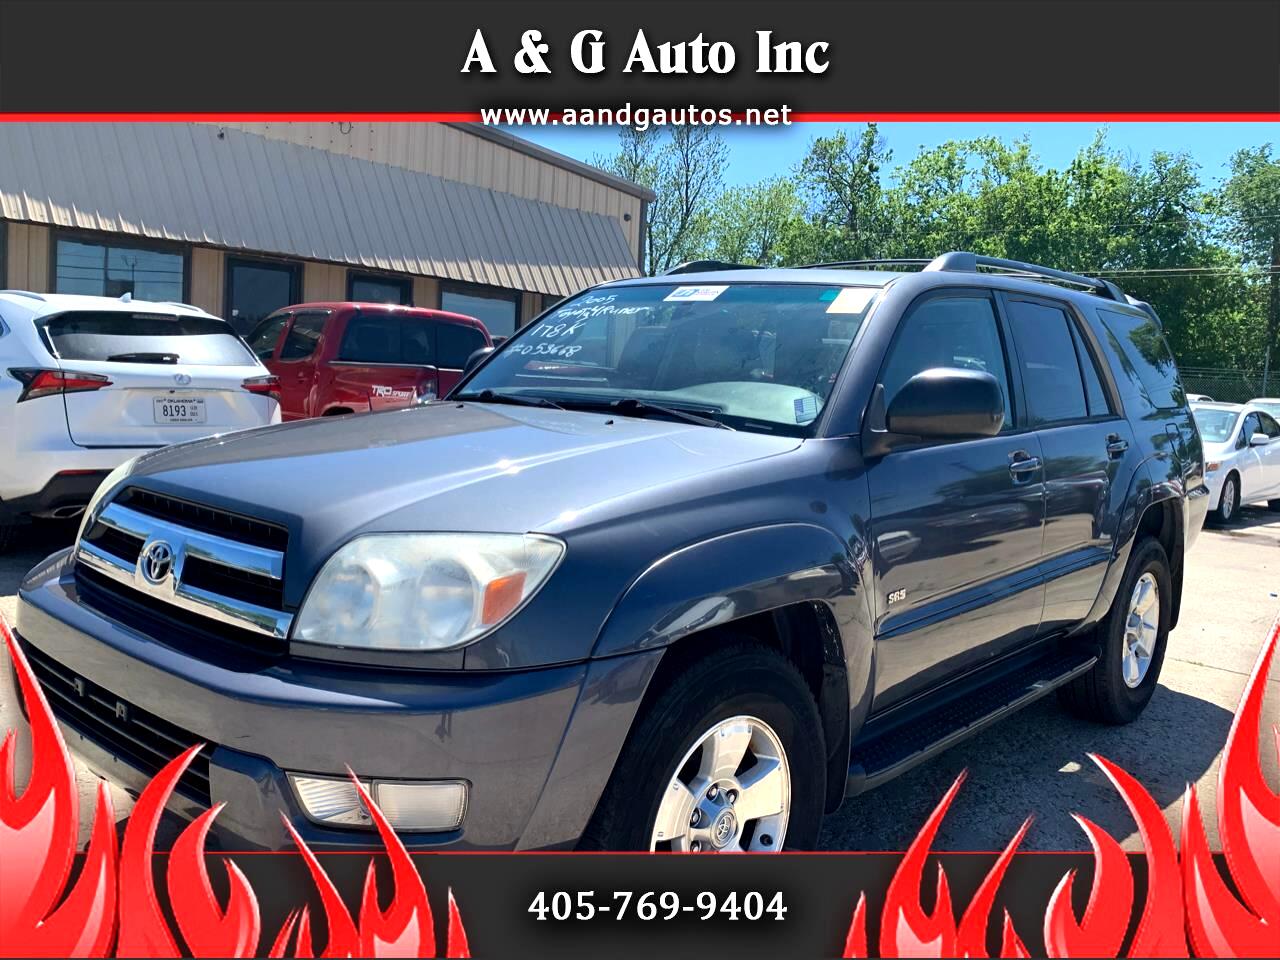 2005 Toyota 4Runner for sale in Oklahoma City OK 73141 by A & G Auto Inc